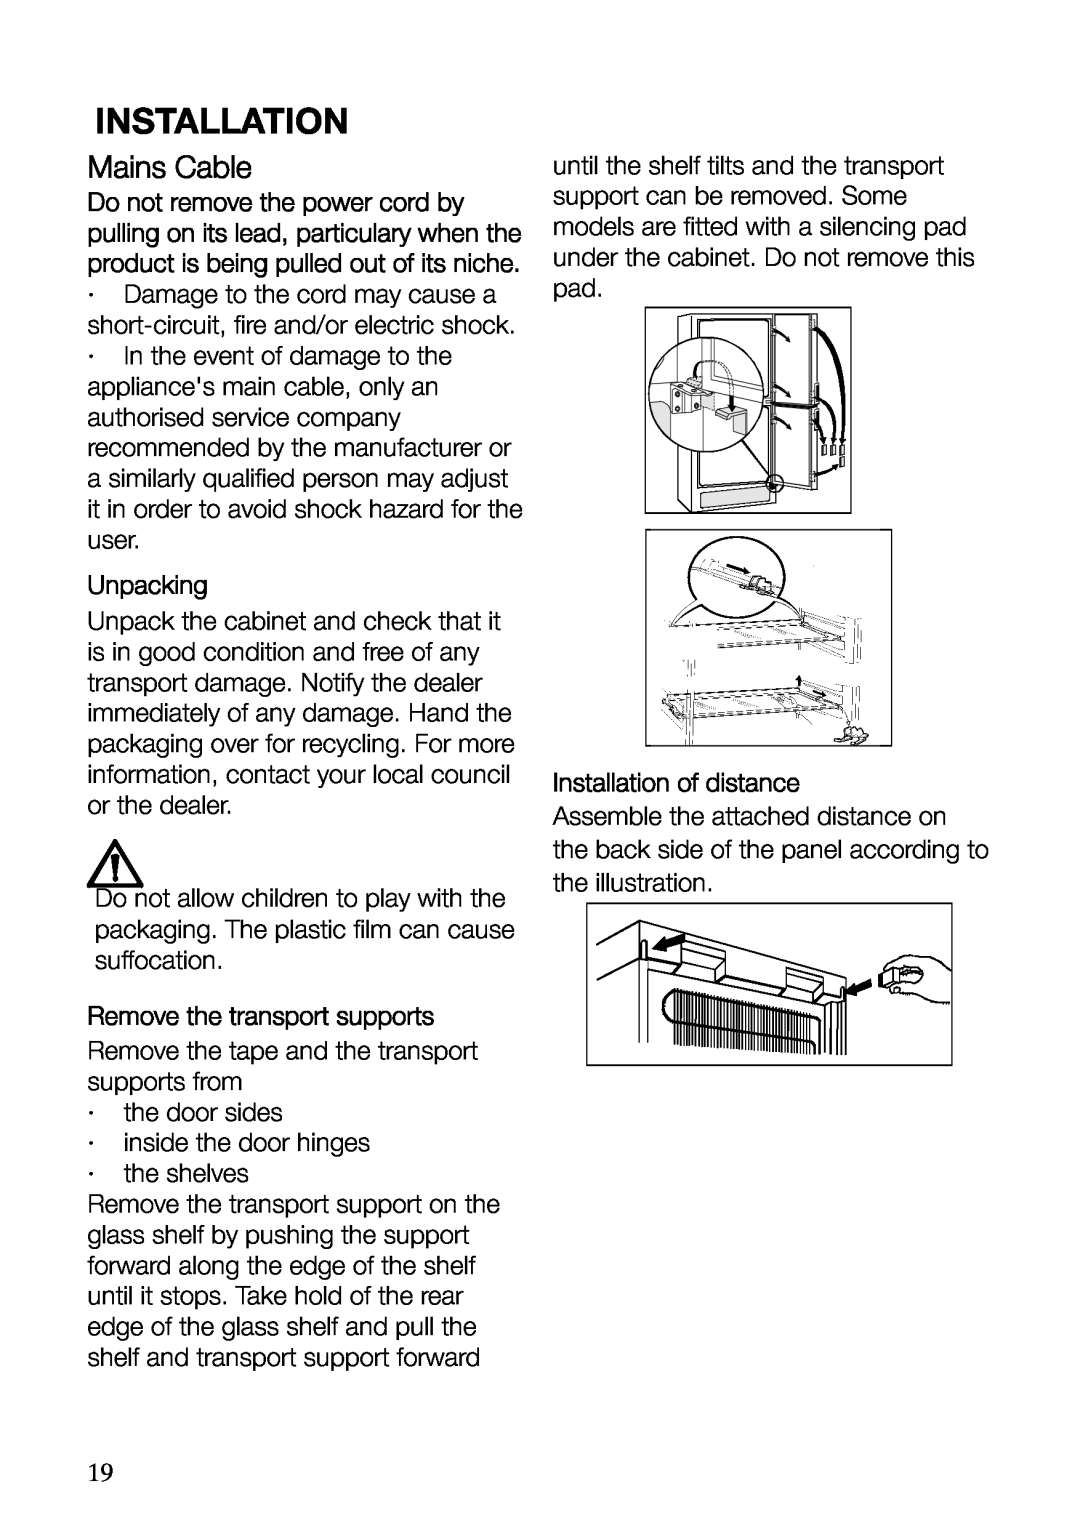 Electrolux ERF37800WX user manual Mains Cable, Unpacking, Remove the transport supports, Installation of distance 